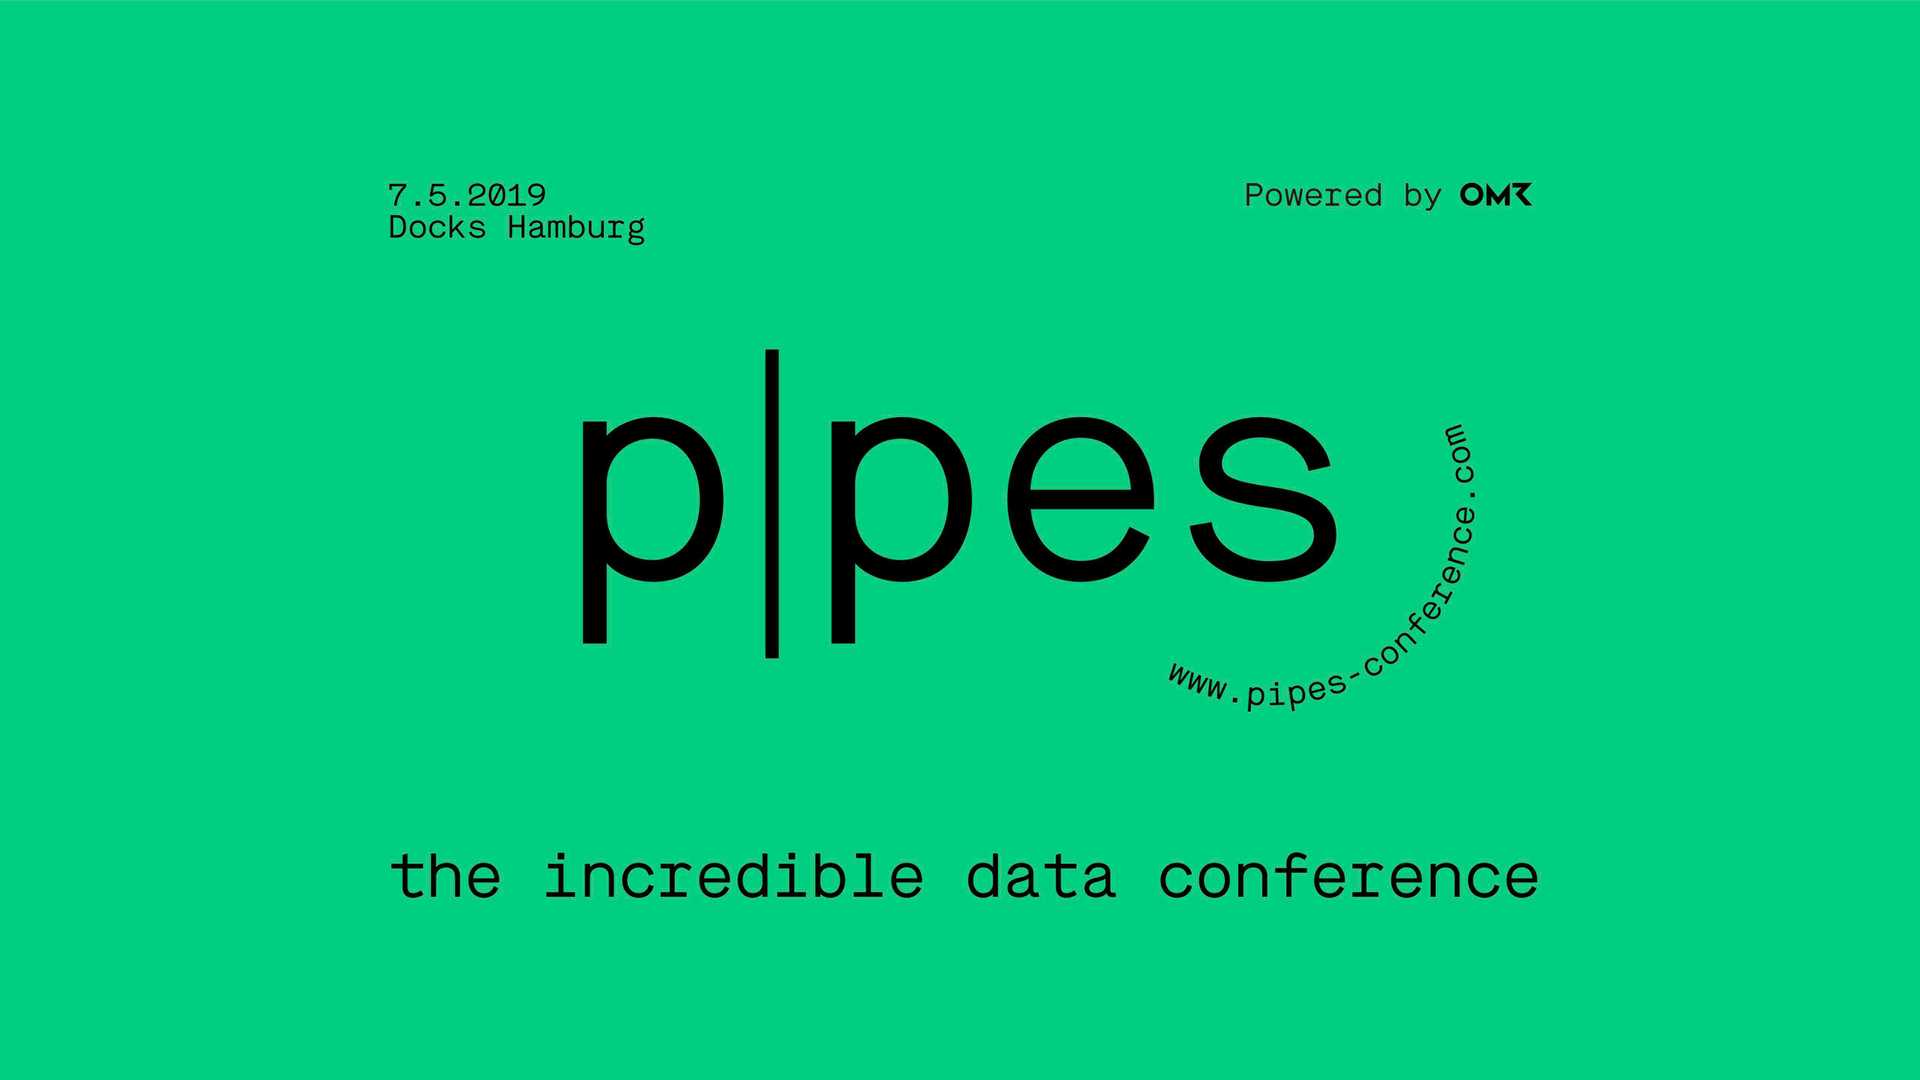 graphic with pipes logo, claim and informations about the event